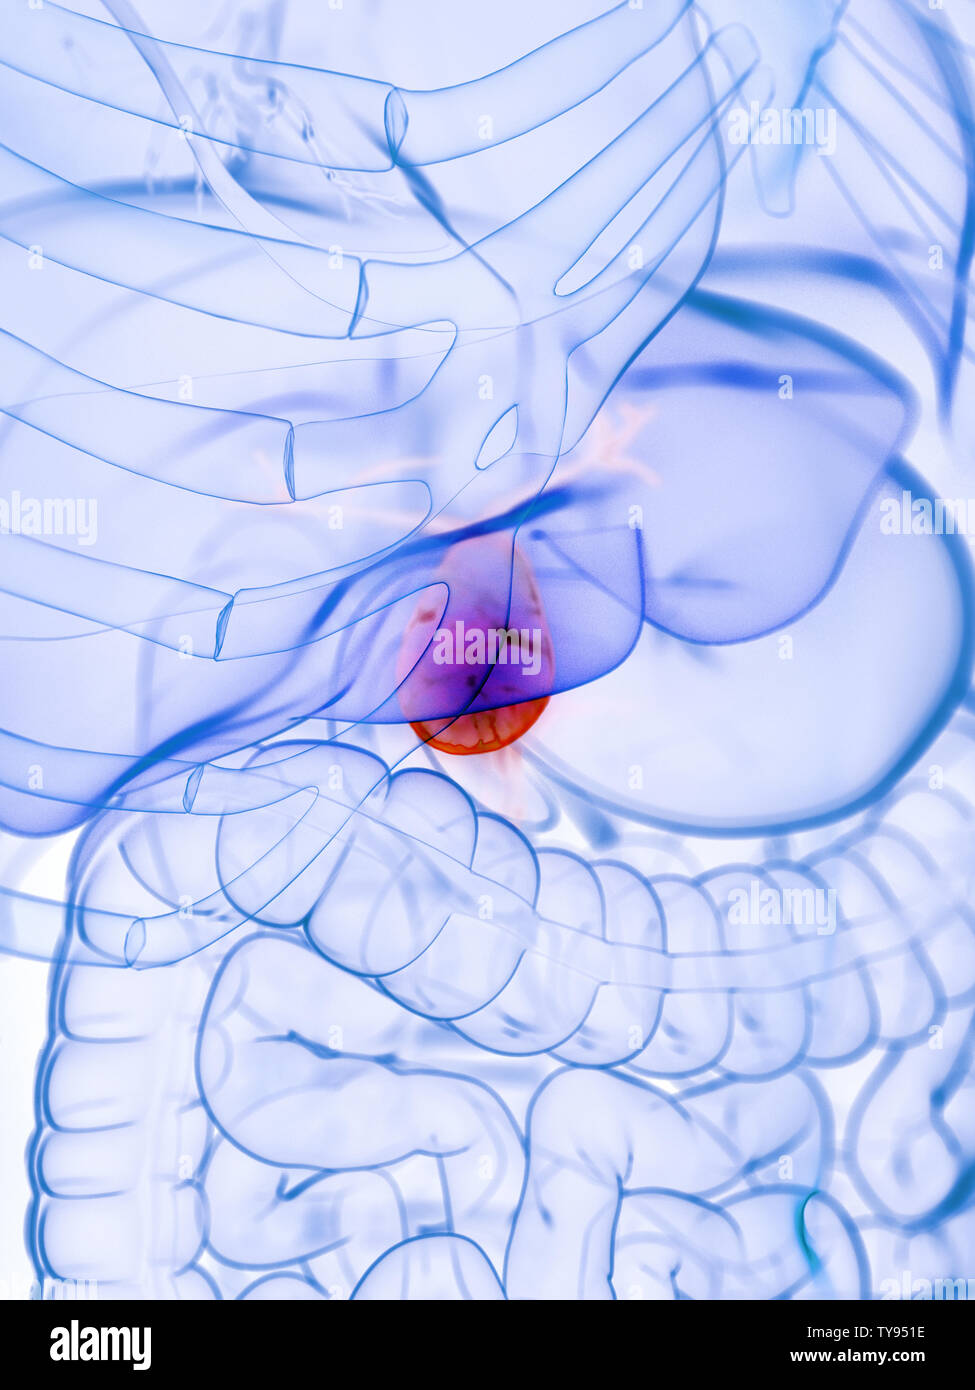 3d rendered medically accurate illustration of a diseased gallbladder Stock Photo